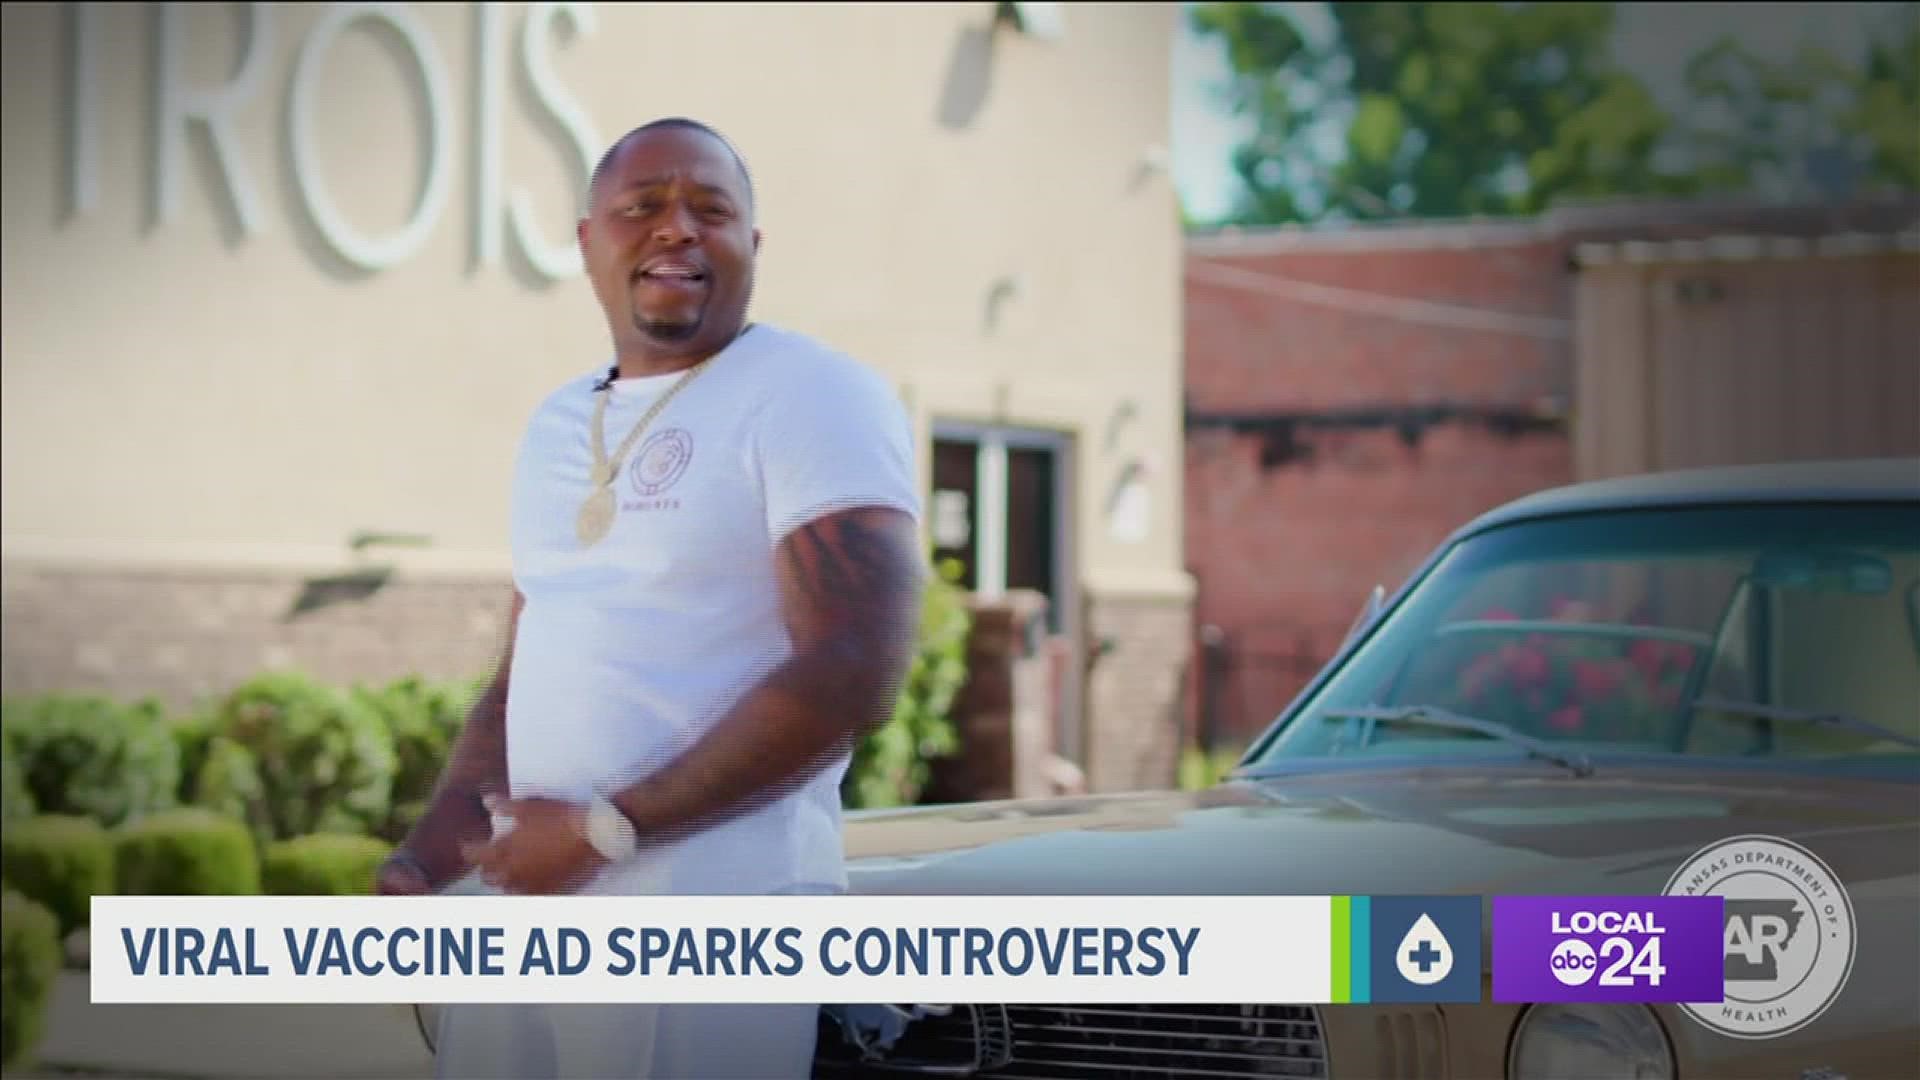 The PSA shows a Black self-proclaimed hustler who said he got vaccinated because he "sell things." The company said he doesn't represent the entire black community.